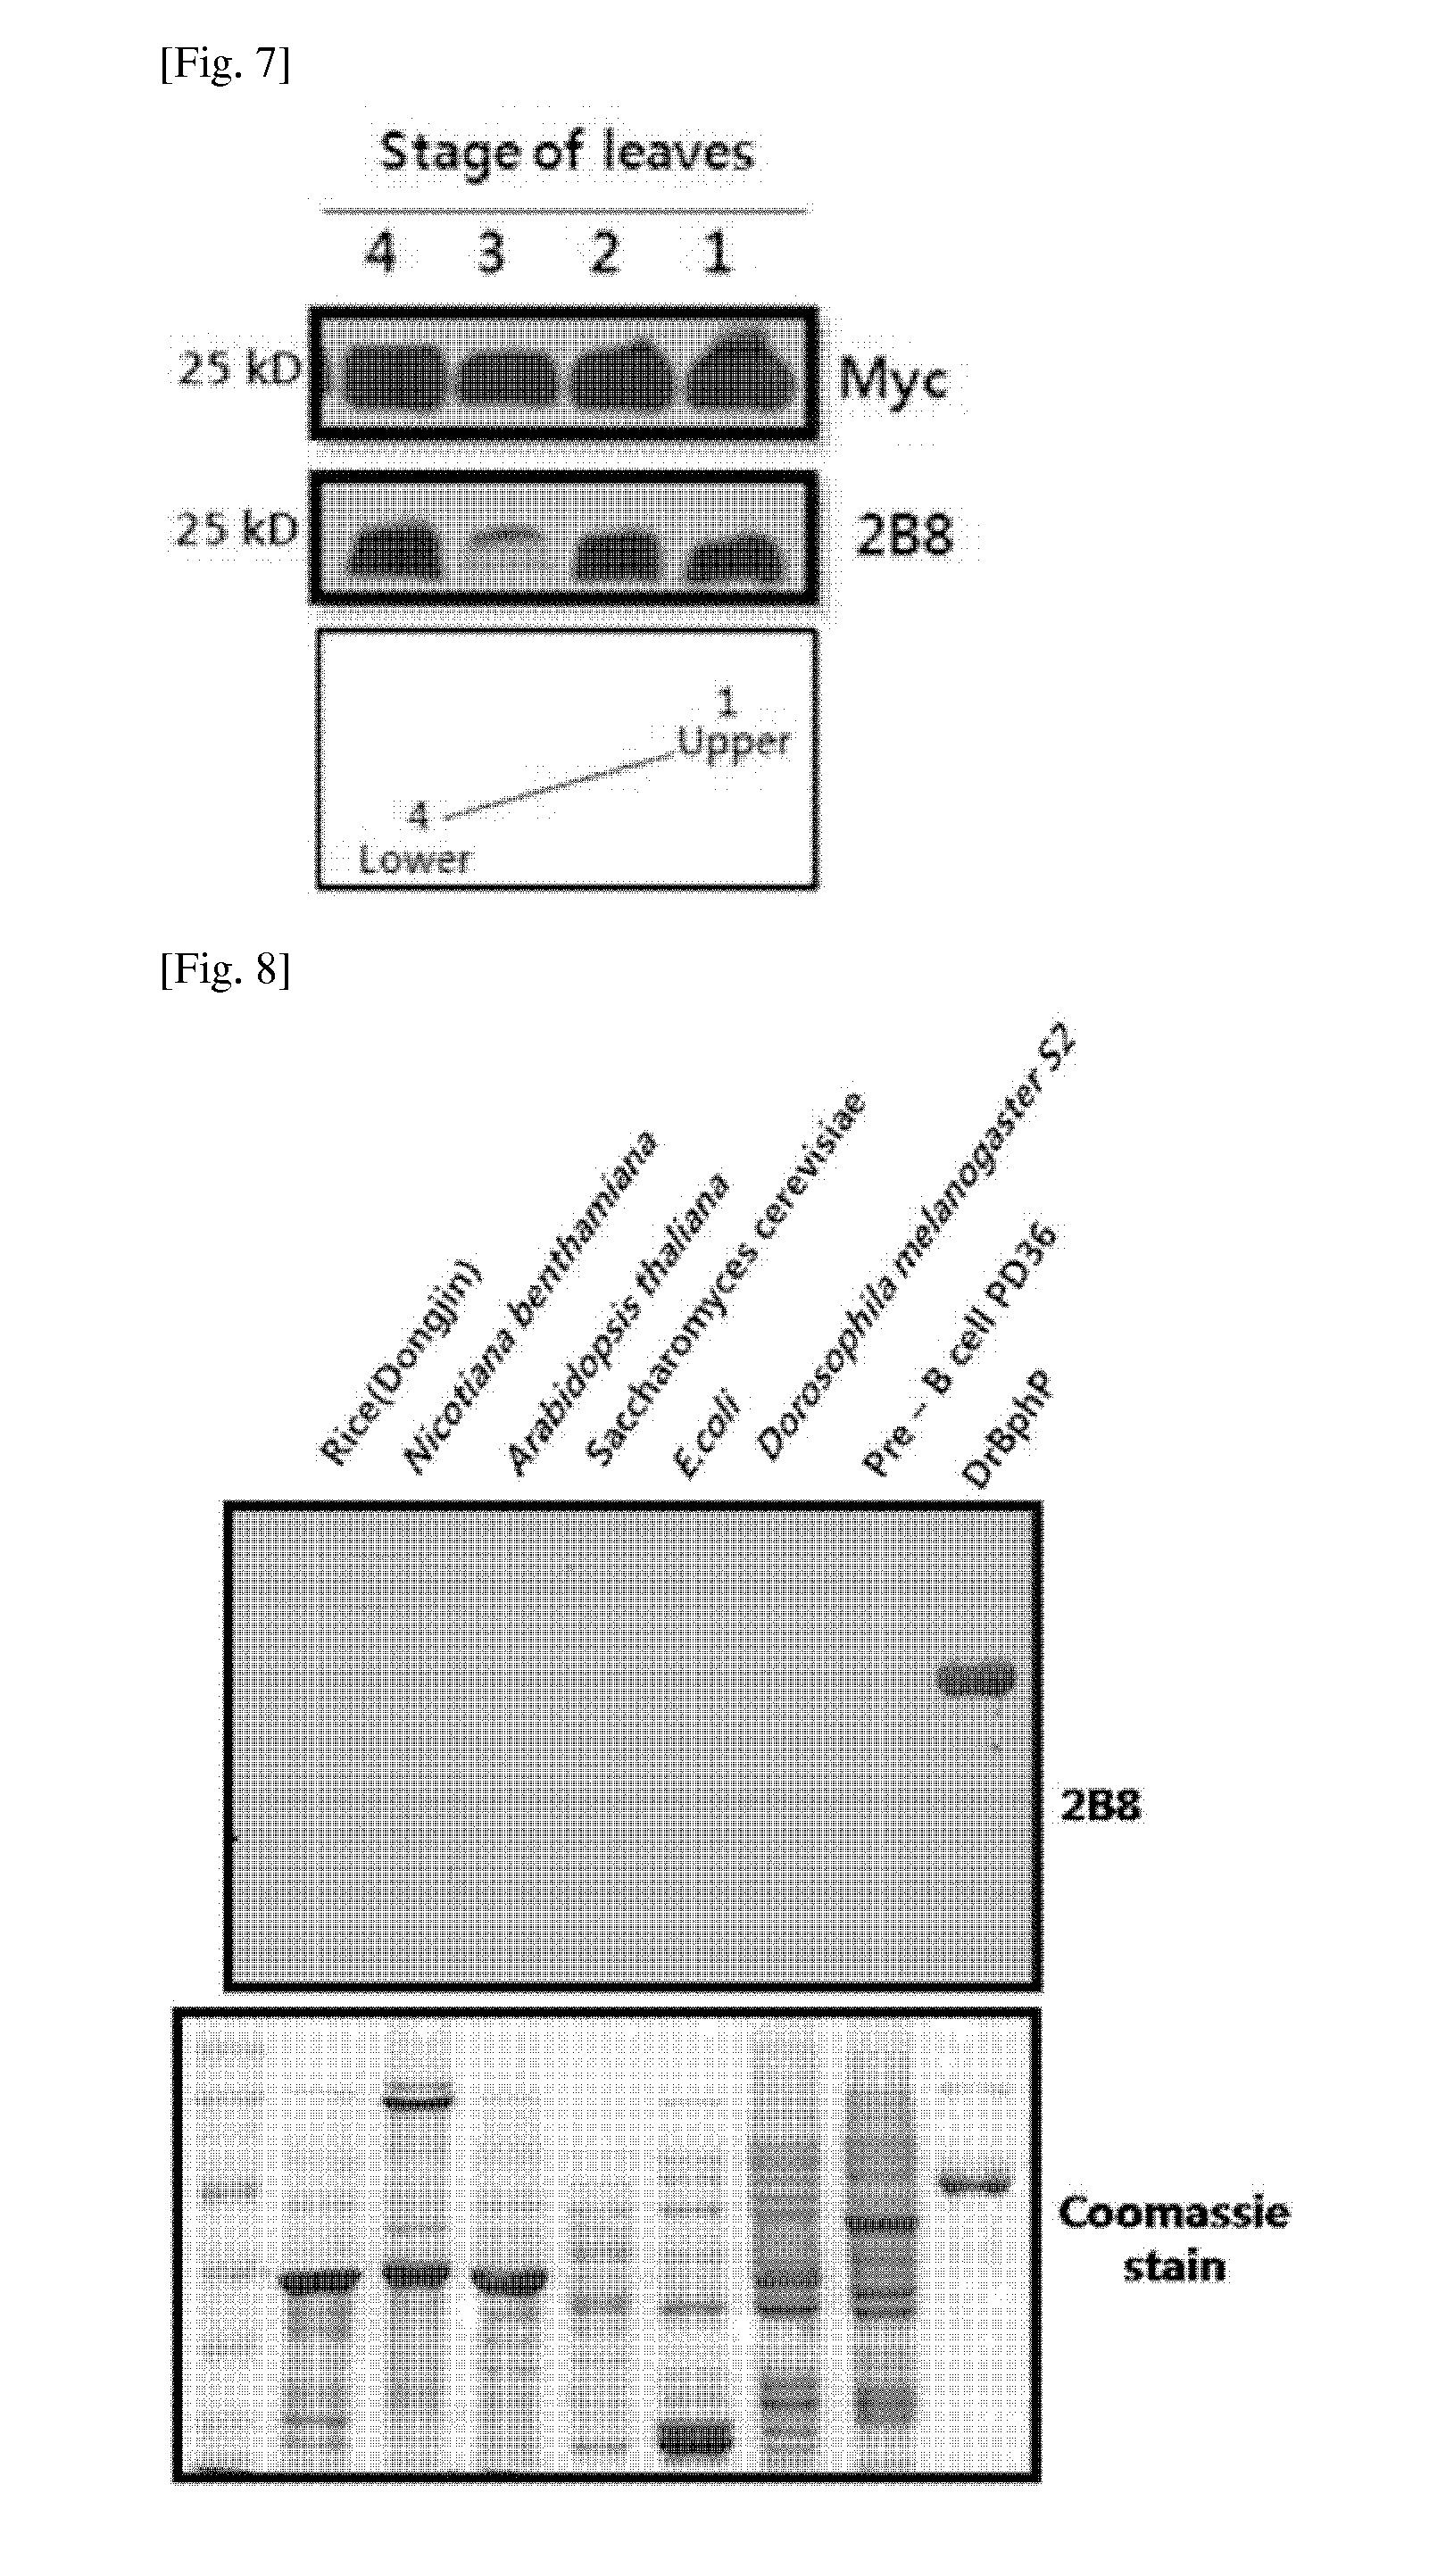 Antibody For Epitope Tagging, Hybridoma Cell Line and Uses Thereof